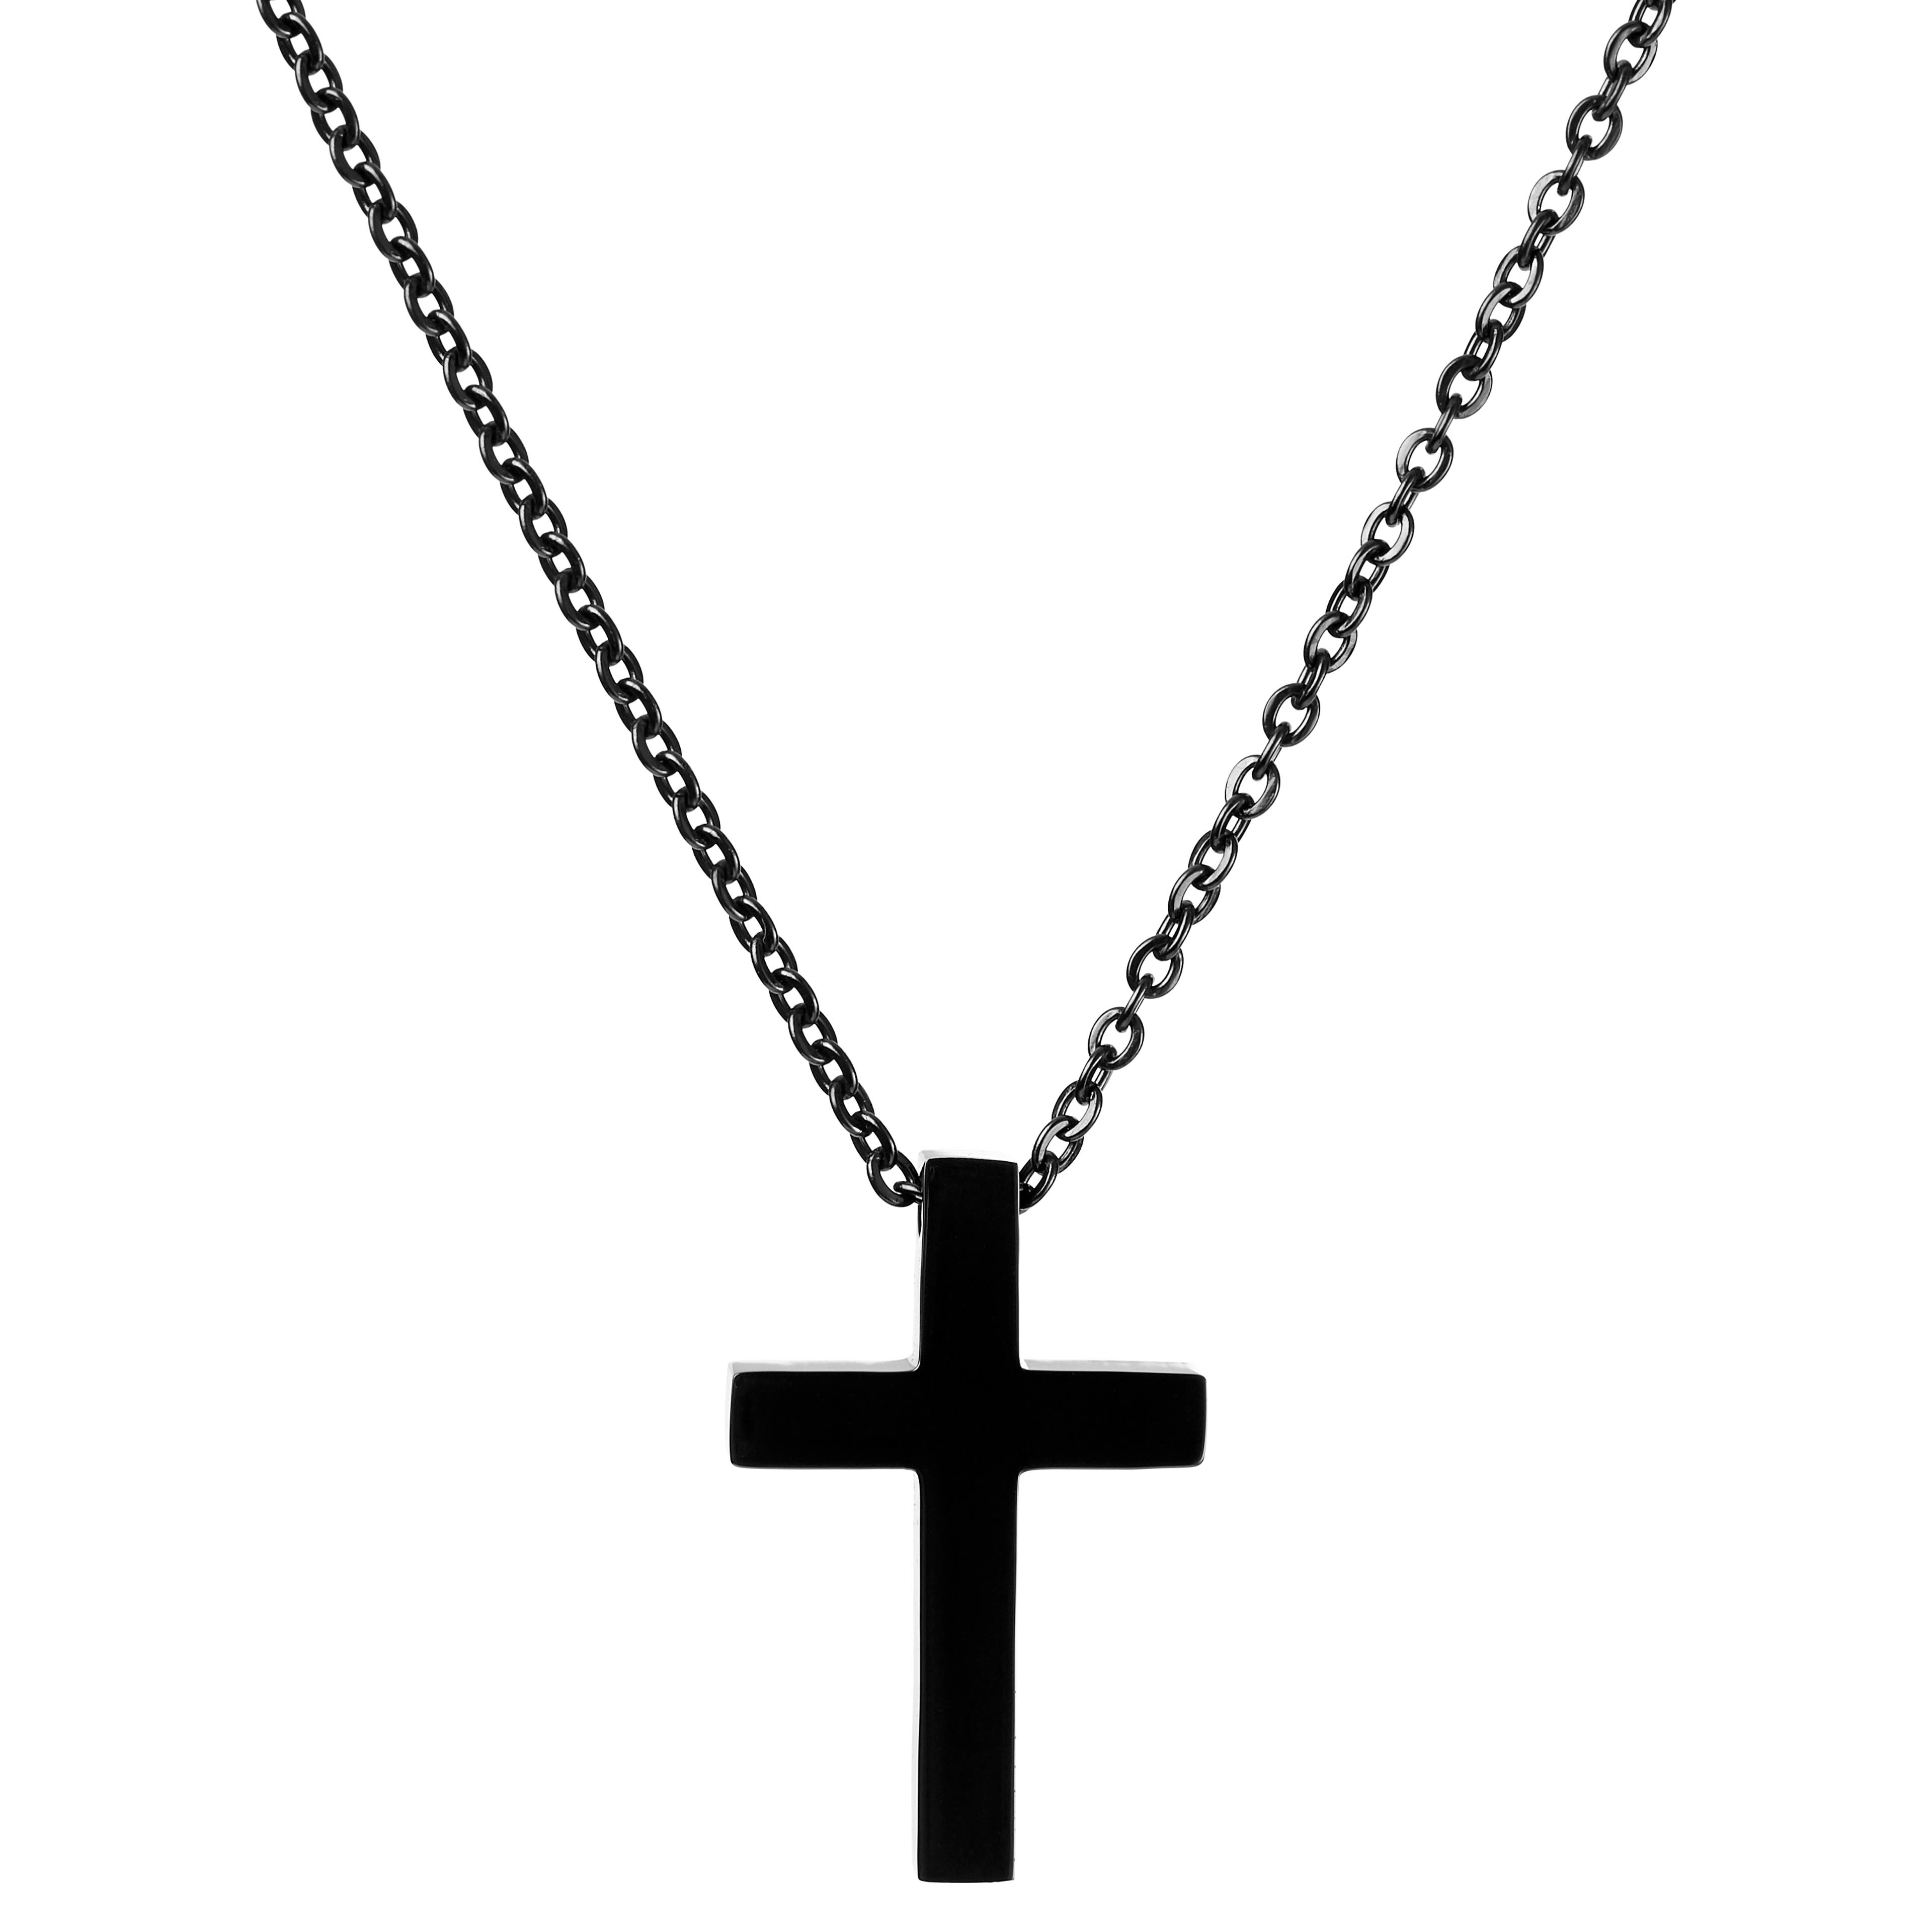 Black Stainless Steel Cross Cable Chain Necklace